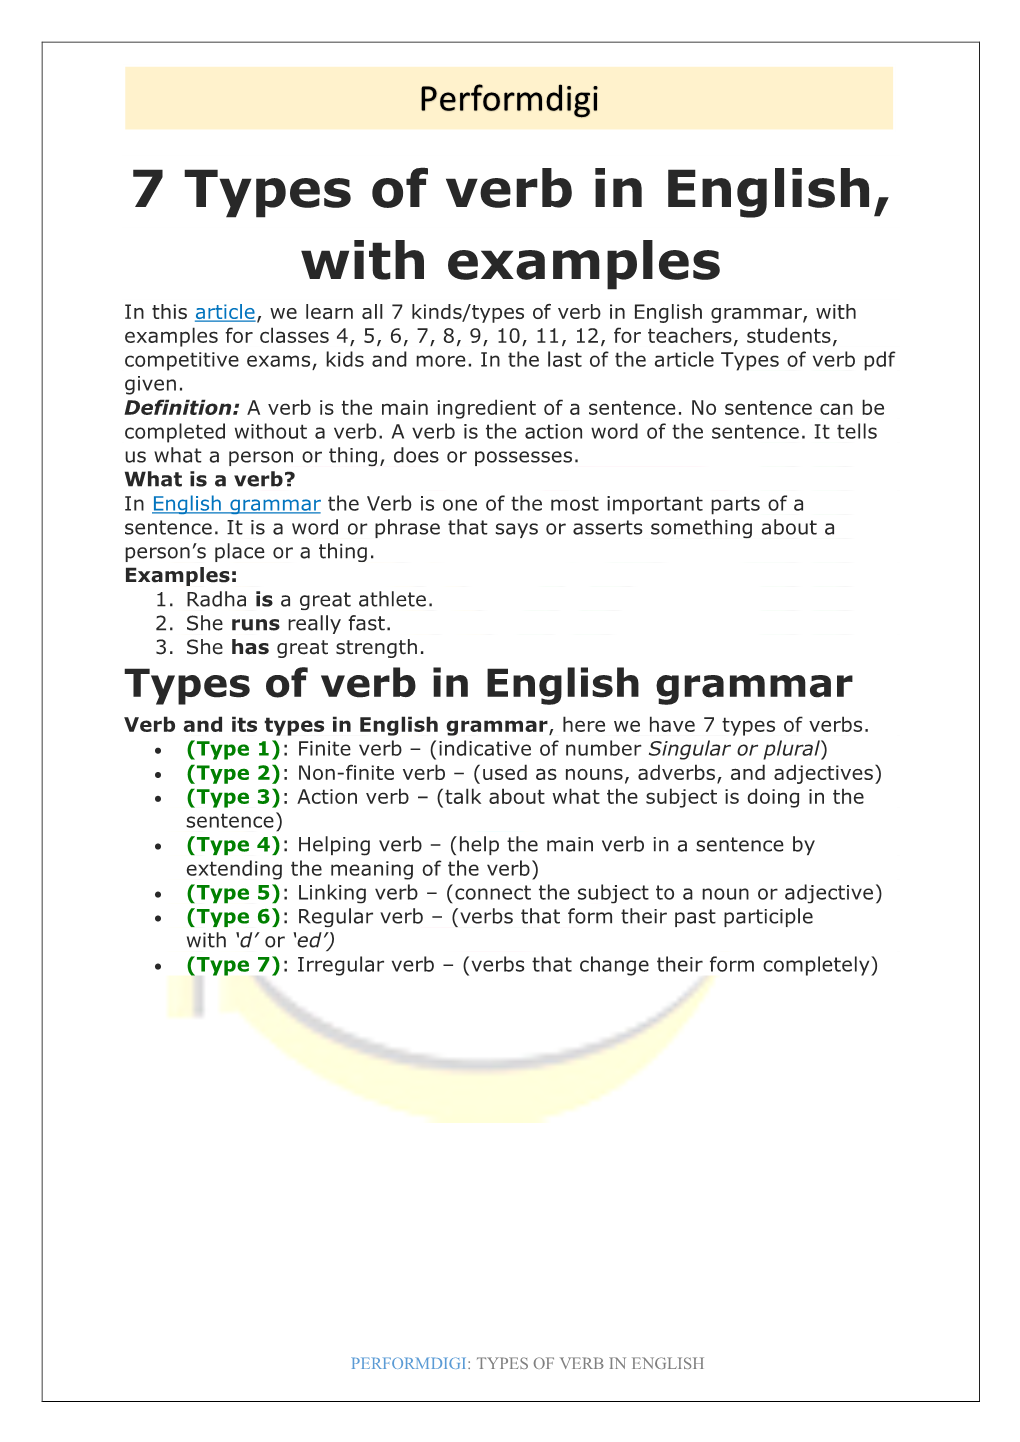 7-types-of-verb-in-english-with-examples-docslib